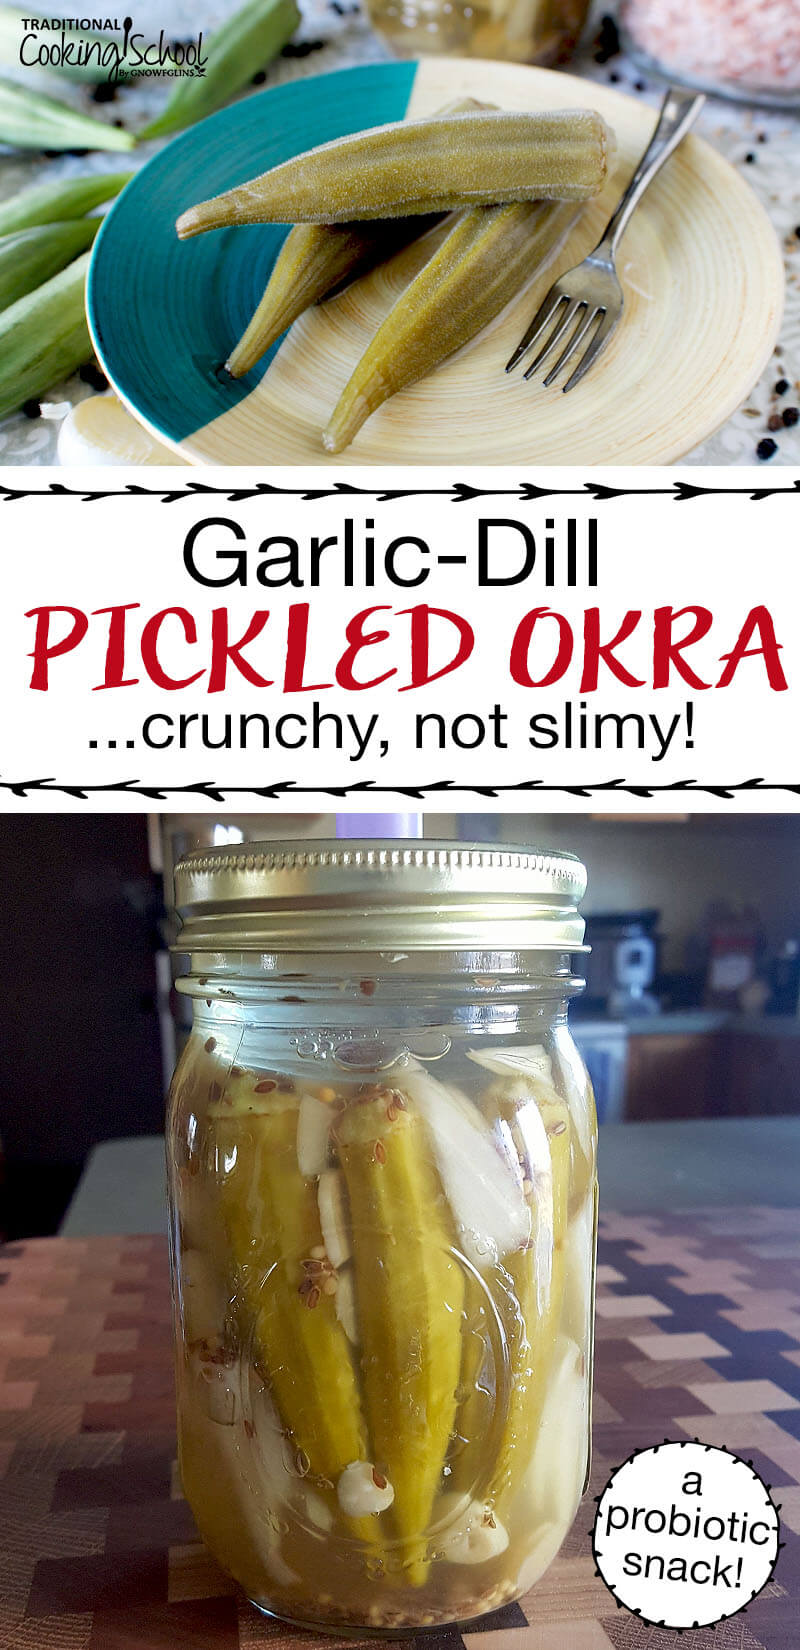 photo collage of pickled okra, with fermented okra on a plate and in a Mason jar, with text overlay: "Garlic-Dill Pickled Okra... crunchy, not slimy! (a probiotic snack)"